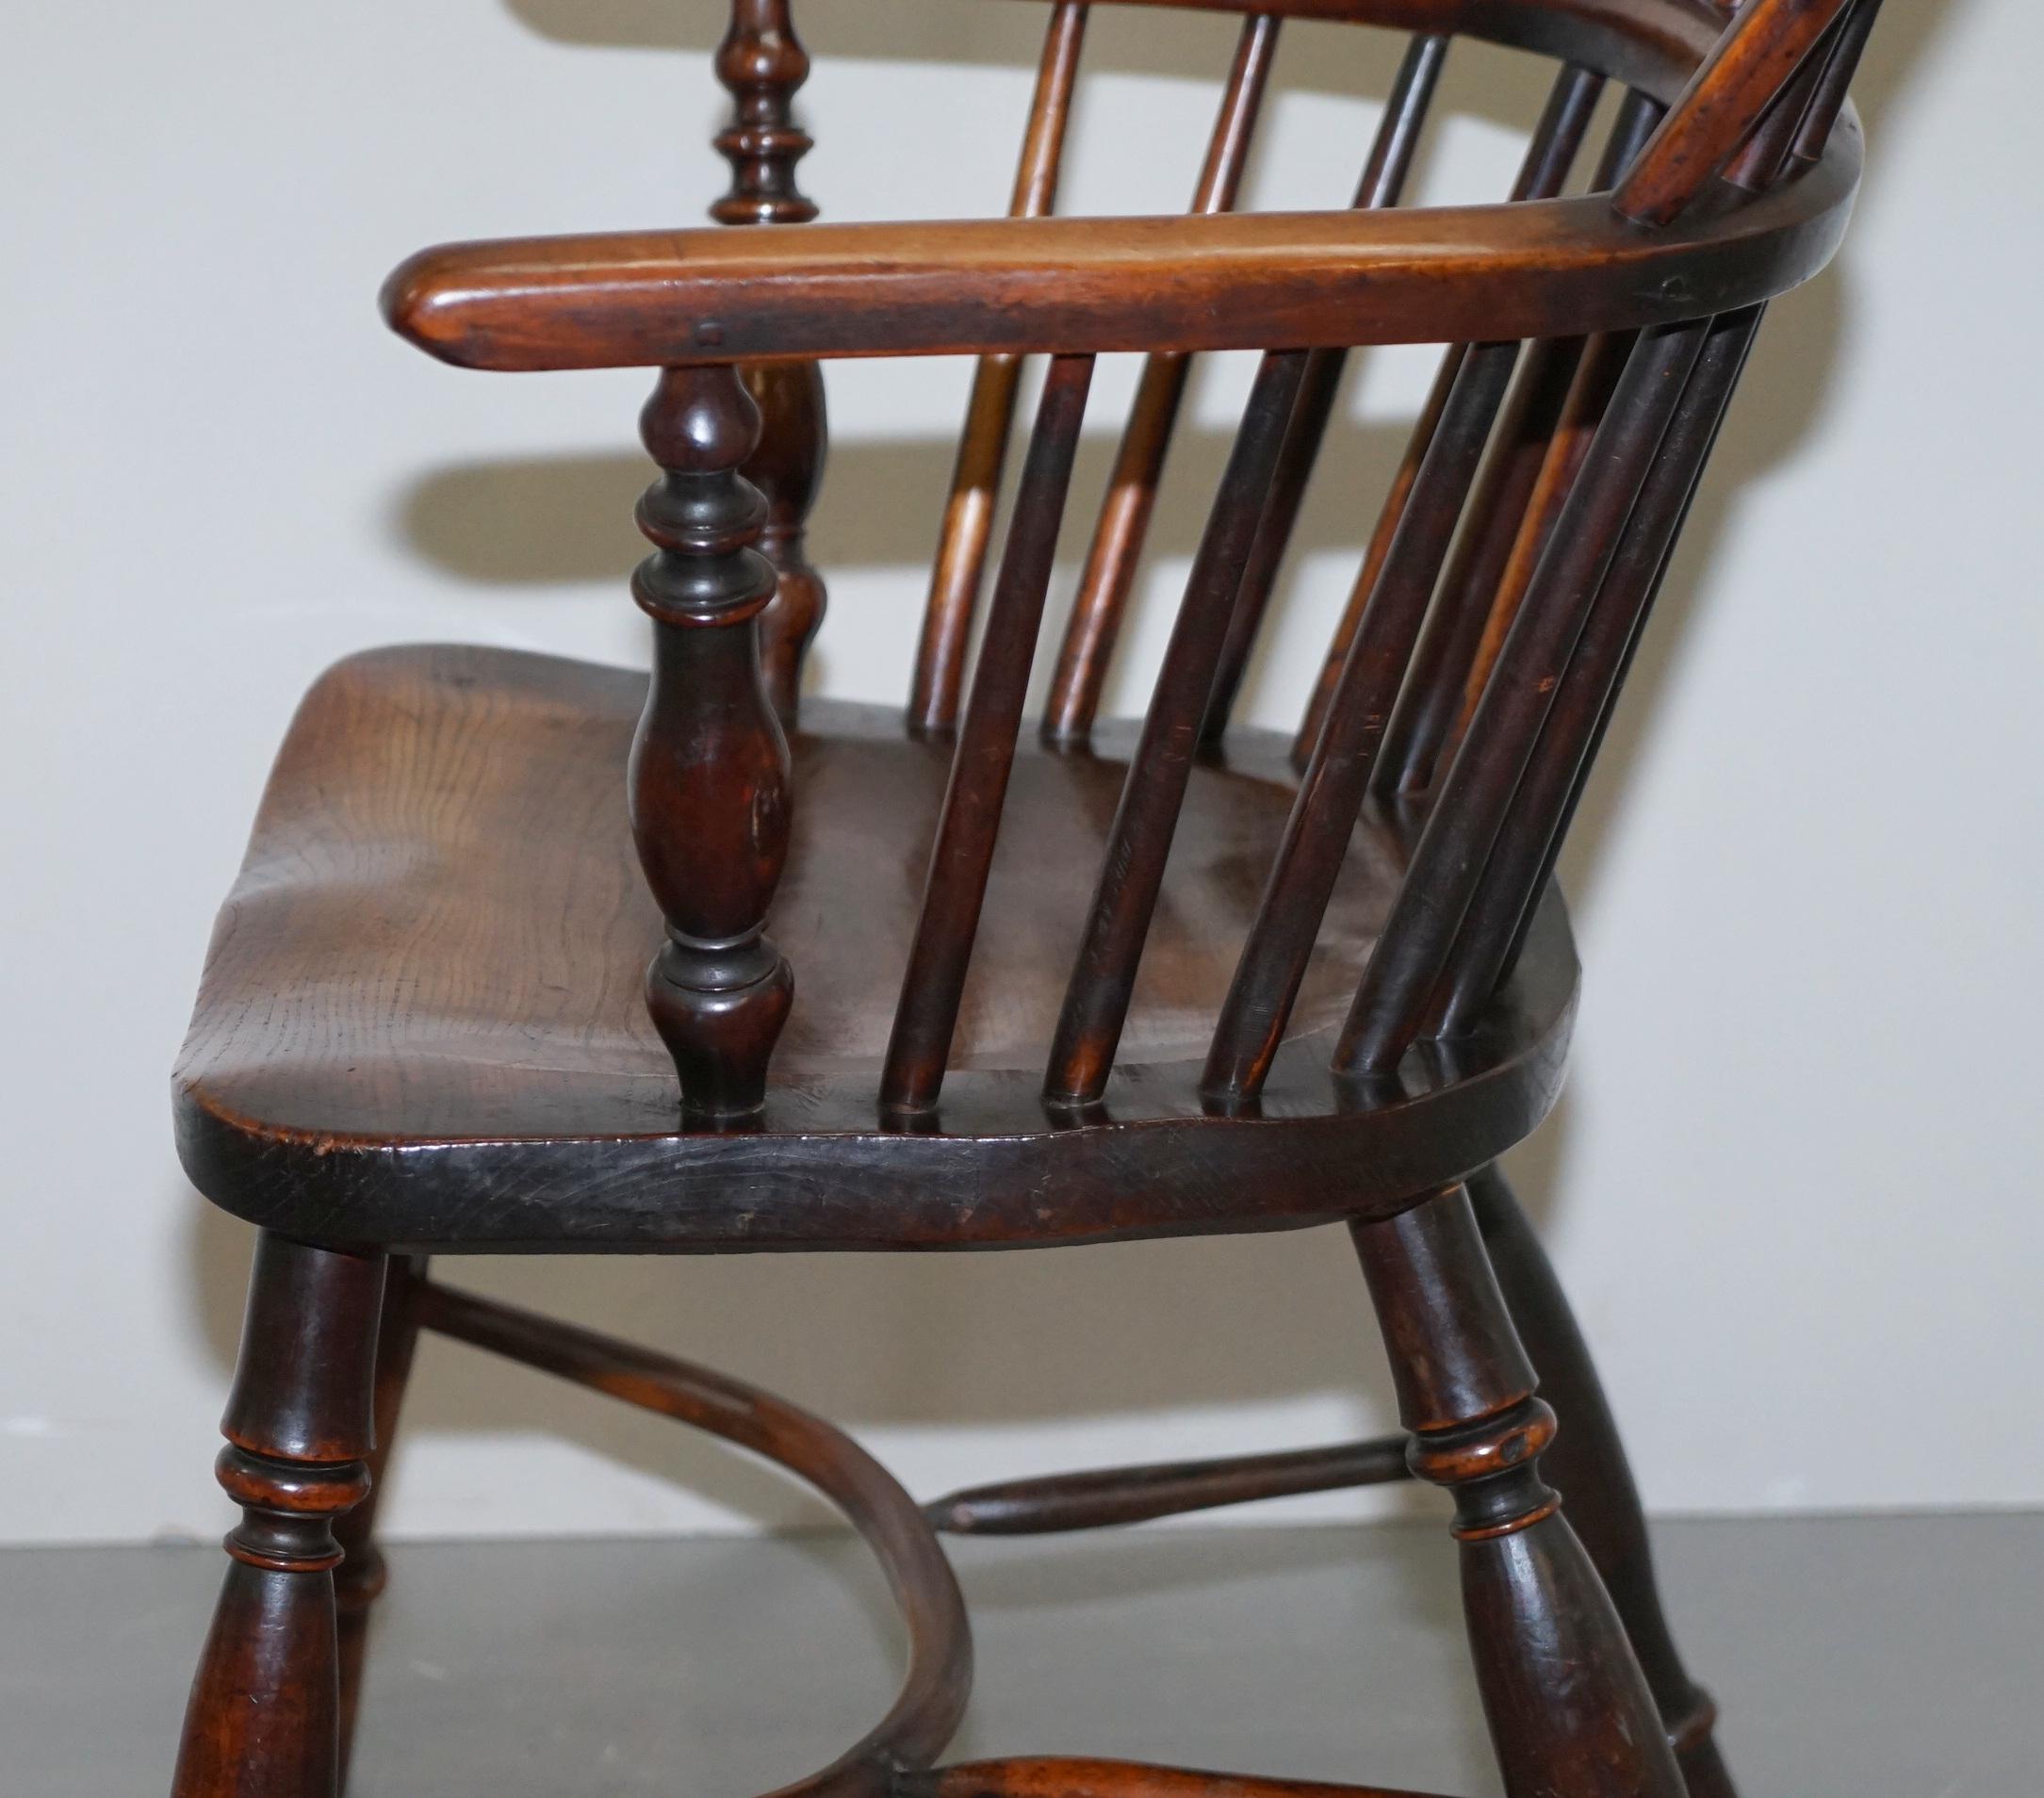 1 of 6 Burr Yew Wood and Elm Windsor Armchairs circa 1860 English Country House 10